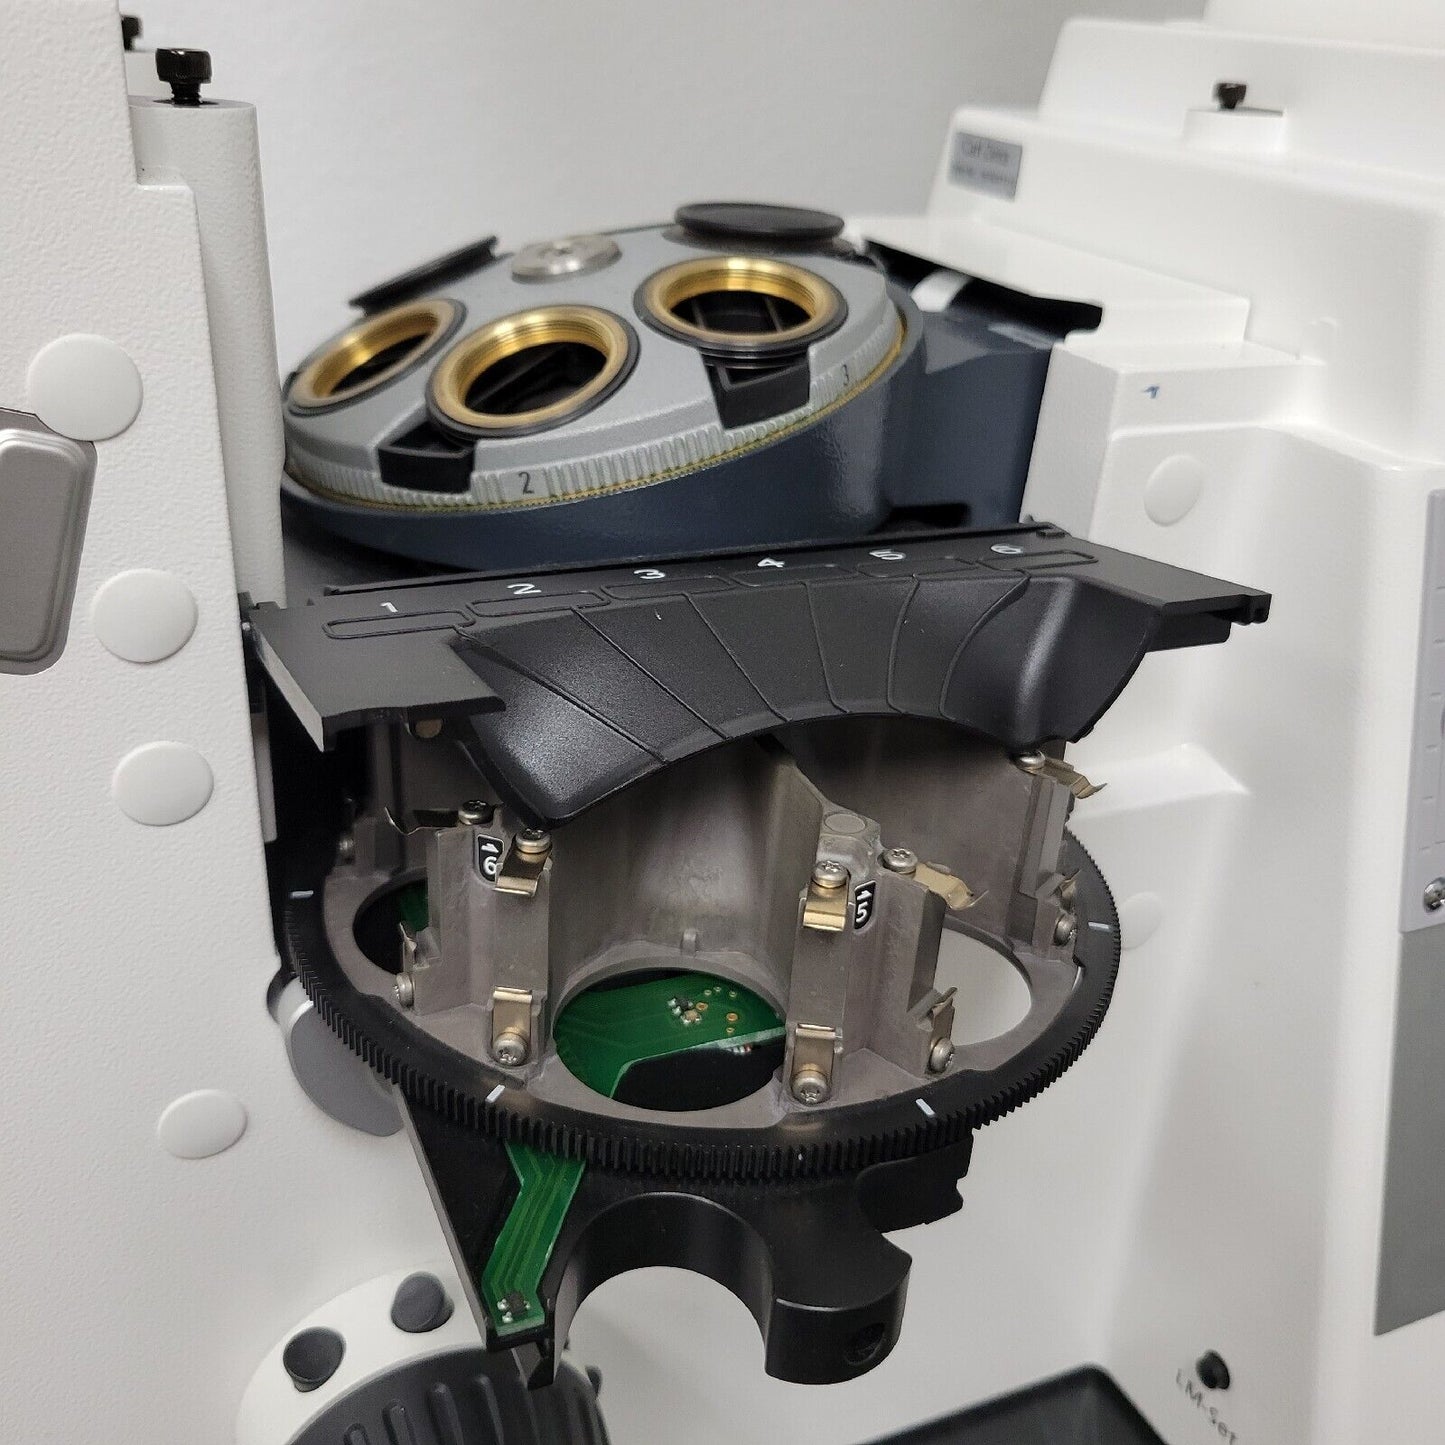 Zeiss Microscope Axio Observer.Z1 Motorized DIC Fluorescence Inverted Stand - microscopemarketplace